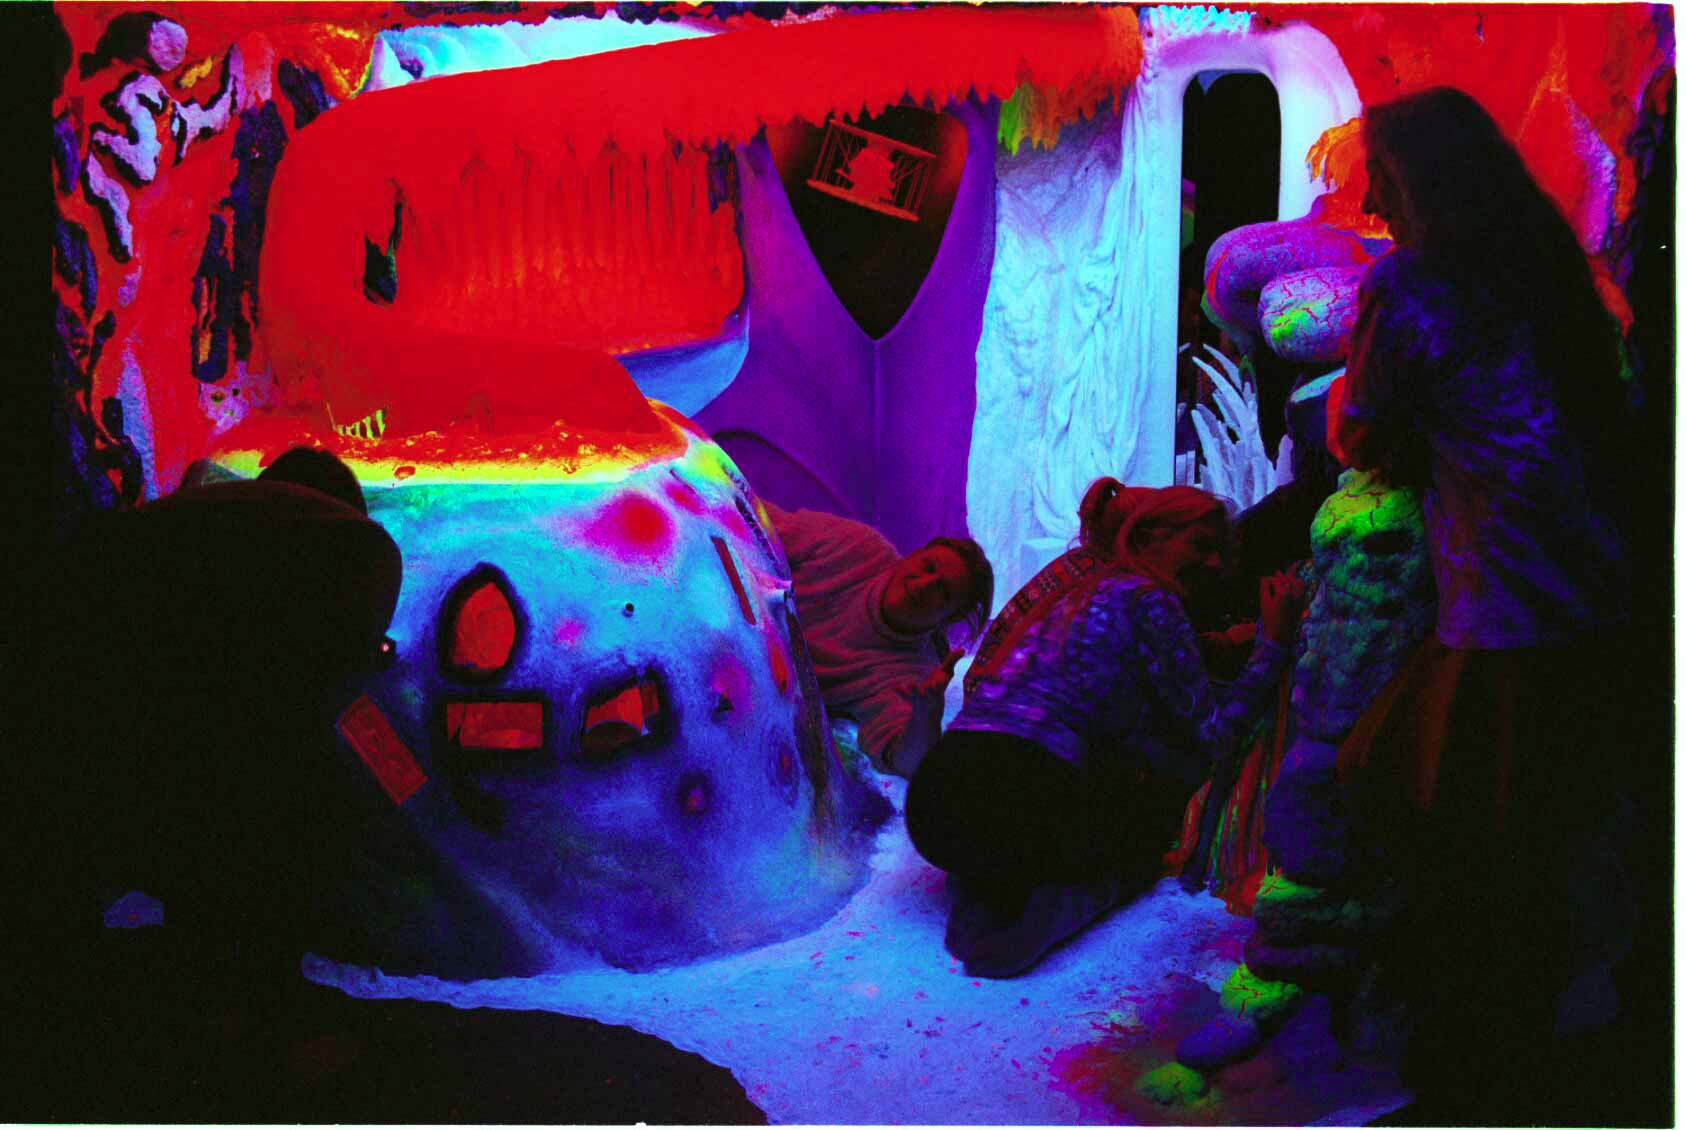 The Electric Ladyland - Fluorescent Art Museum